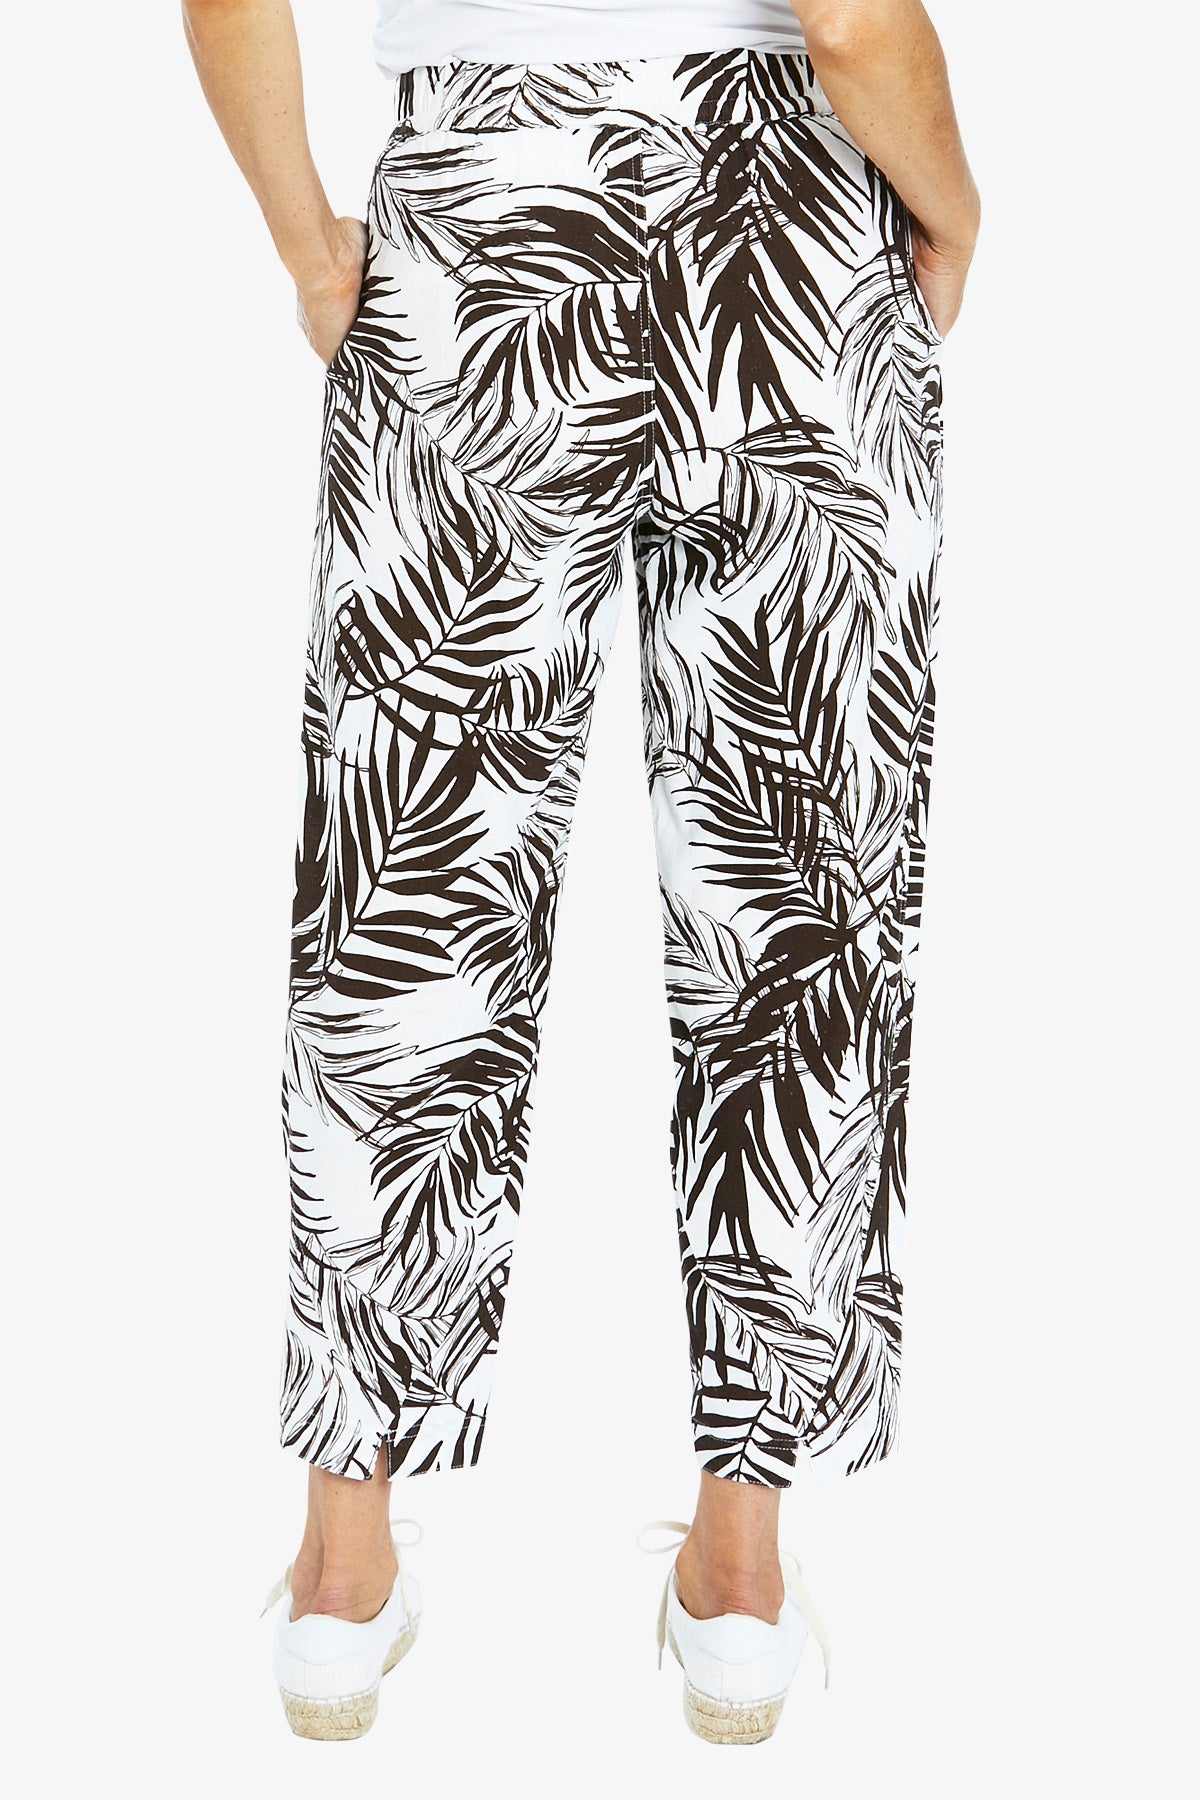 Etched Leaf Print Pant White and Mocha